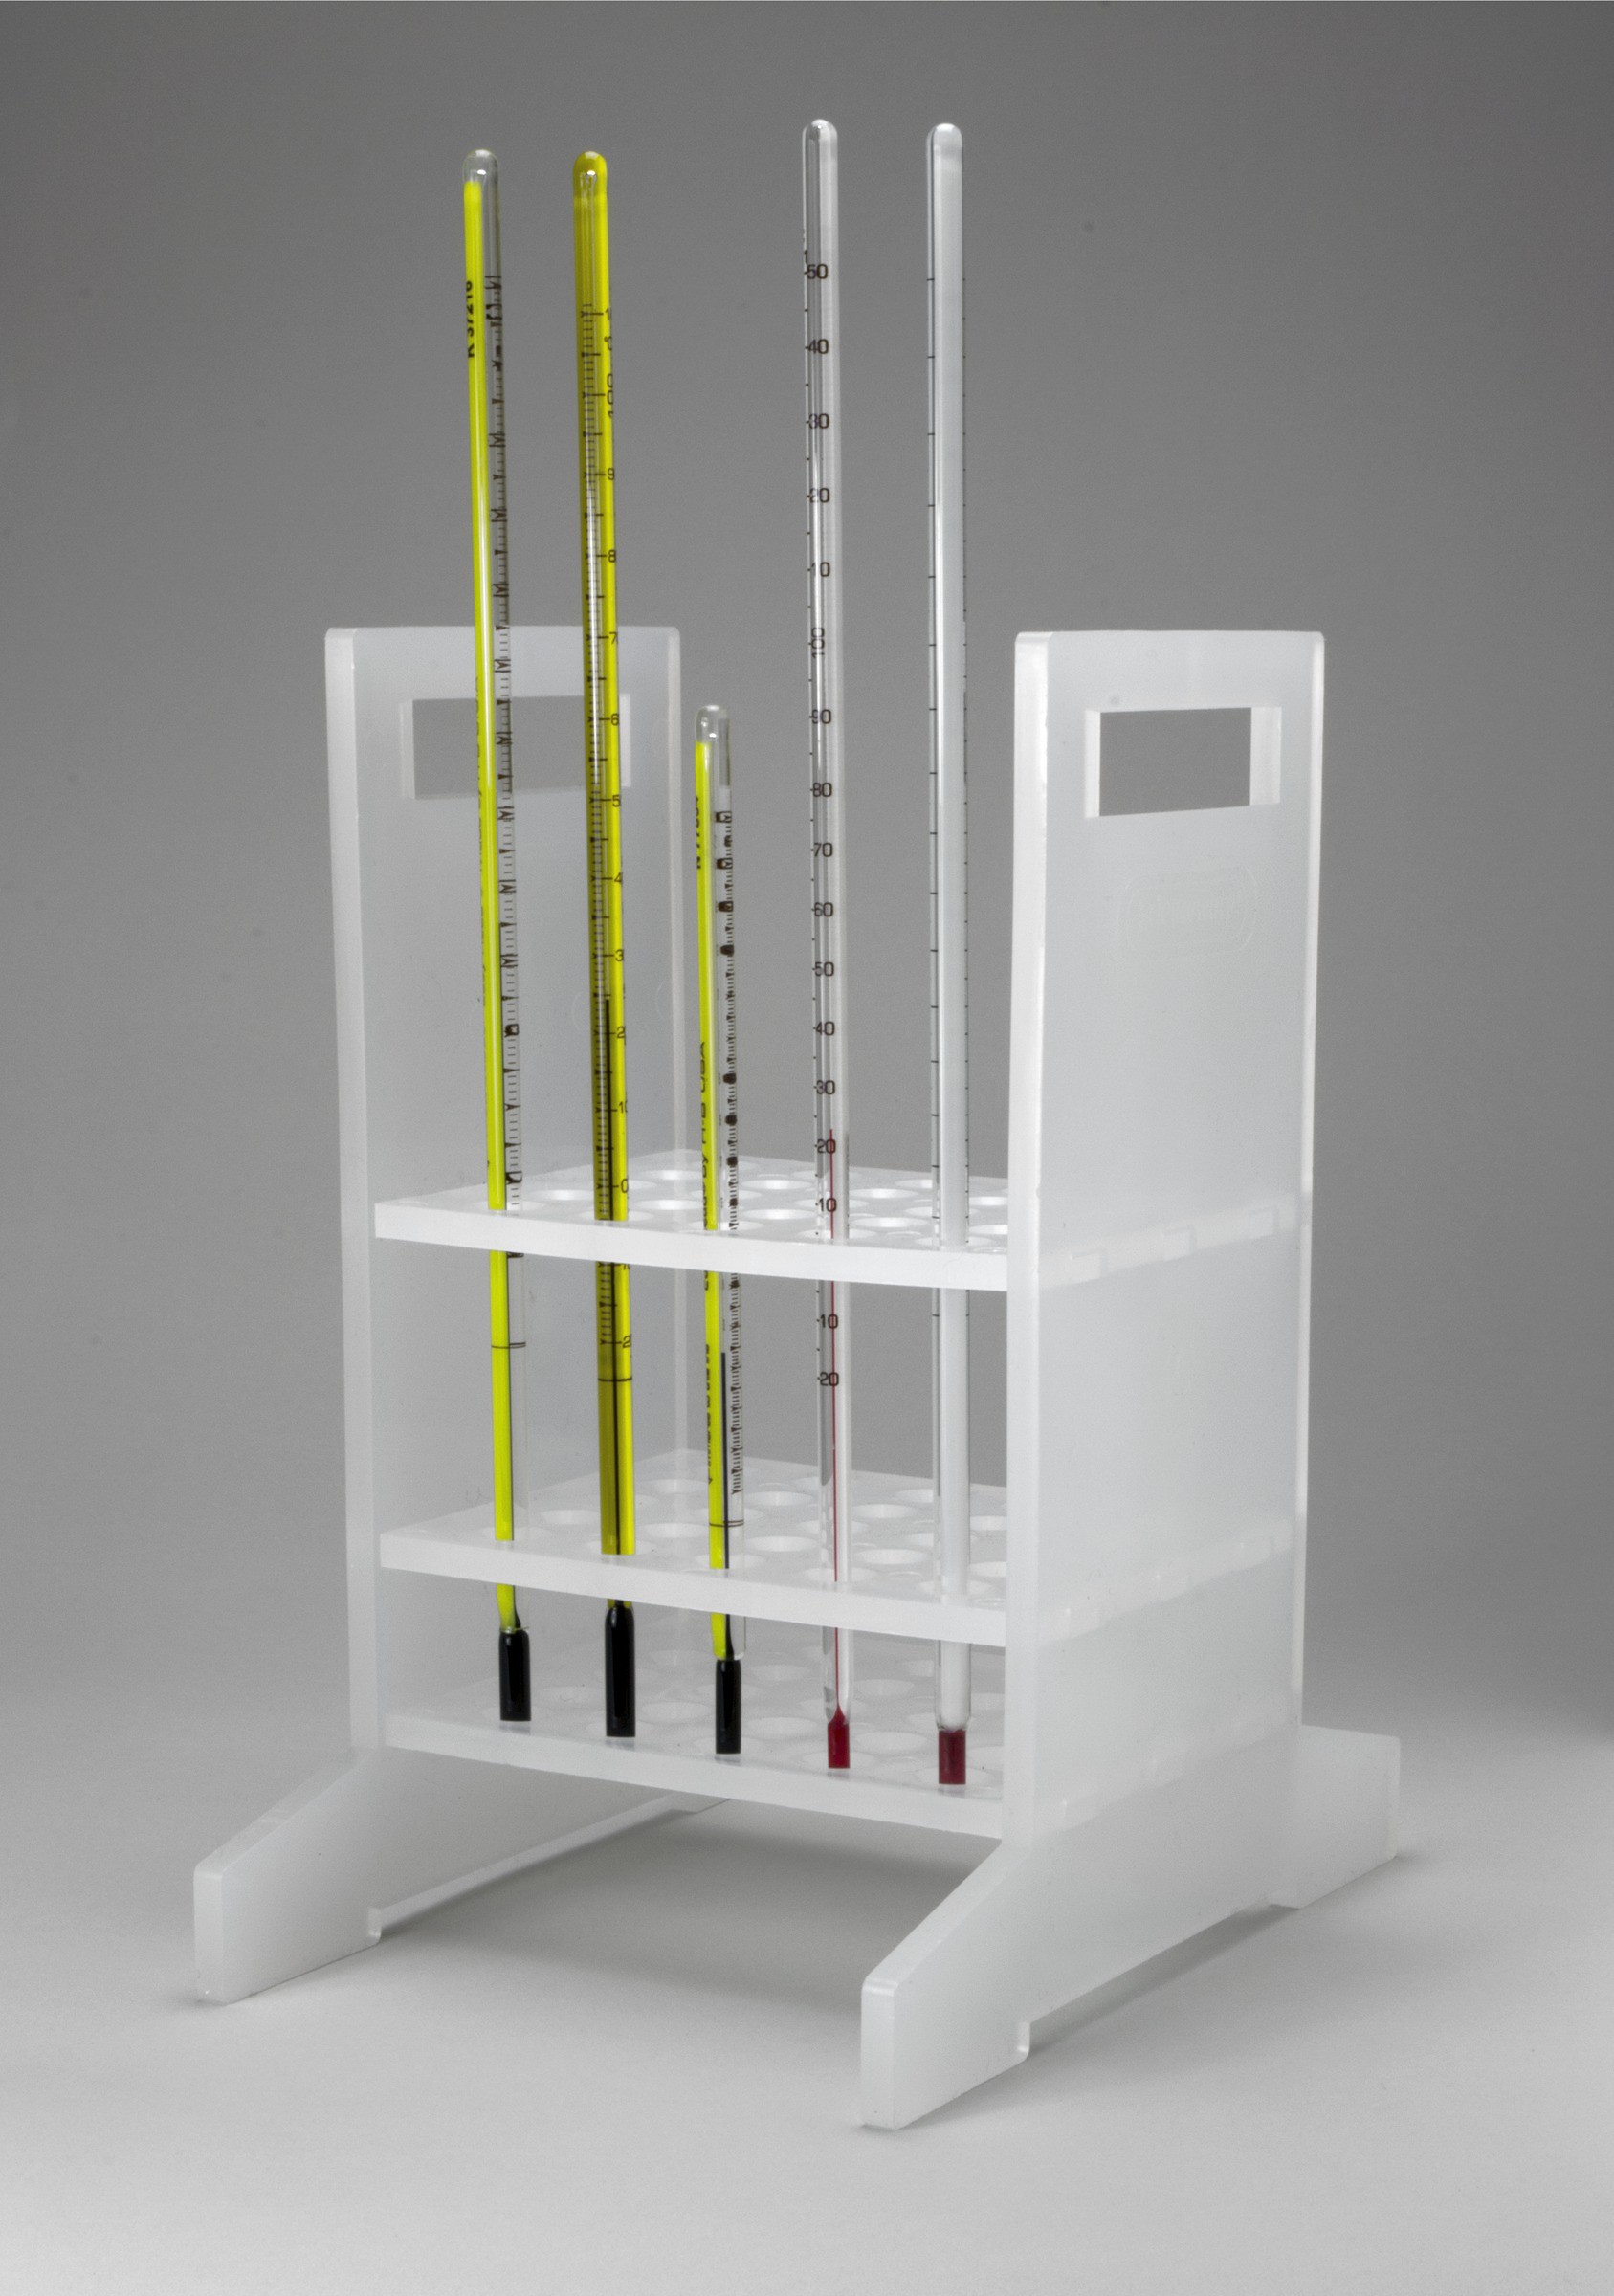 Thermometer Rack